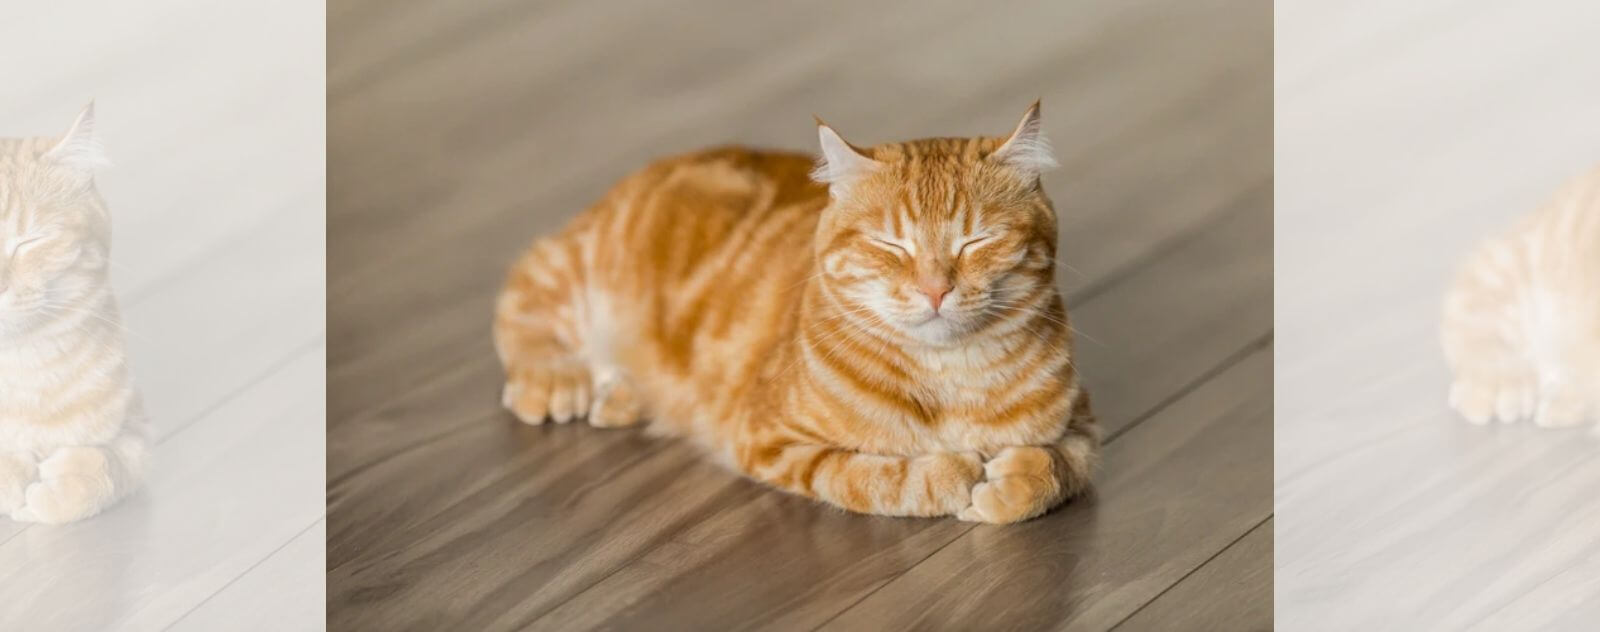 Ginger Cat Sleeping on the Parquet with Closed Eyes